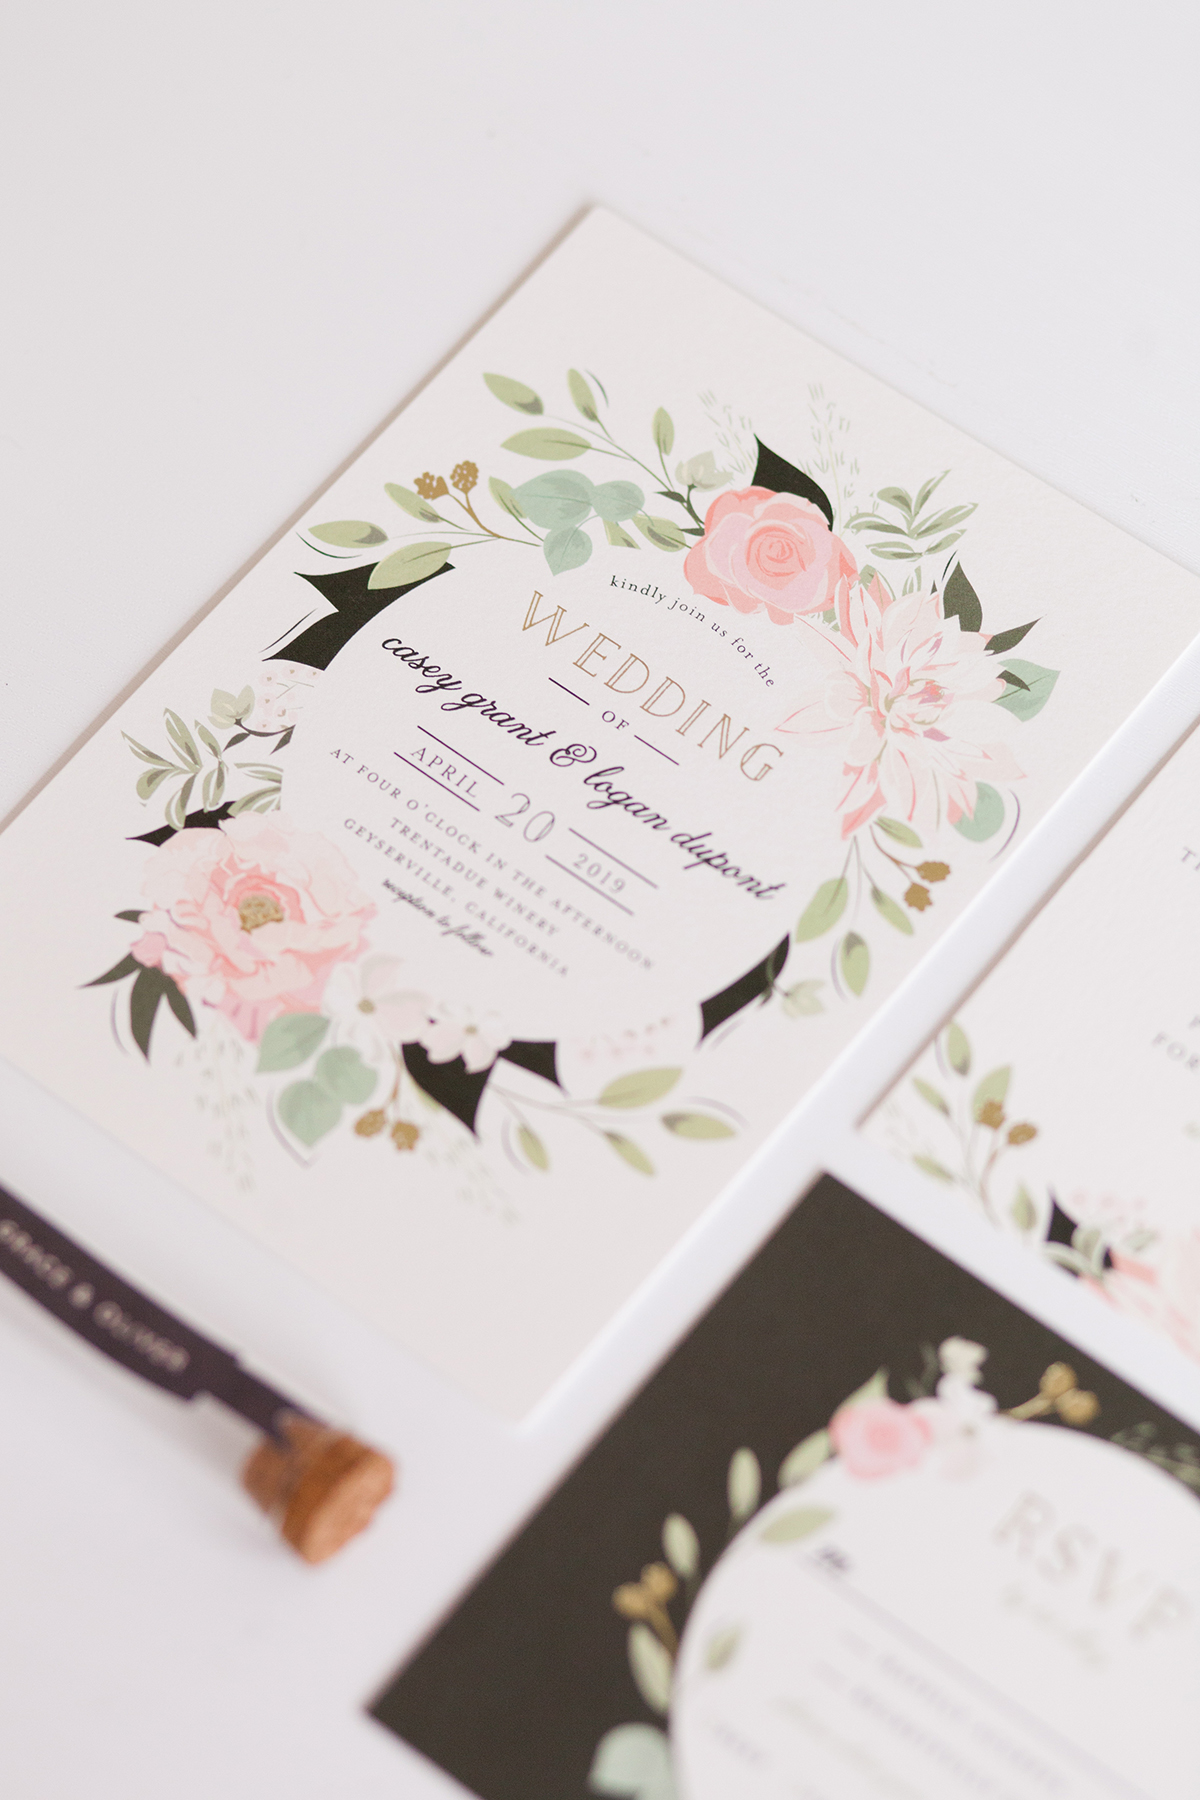 Minted Wedding Invitations with Flowers